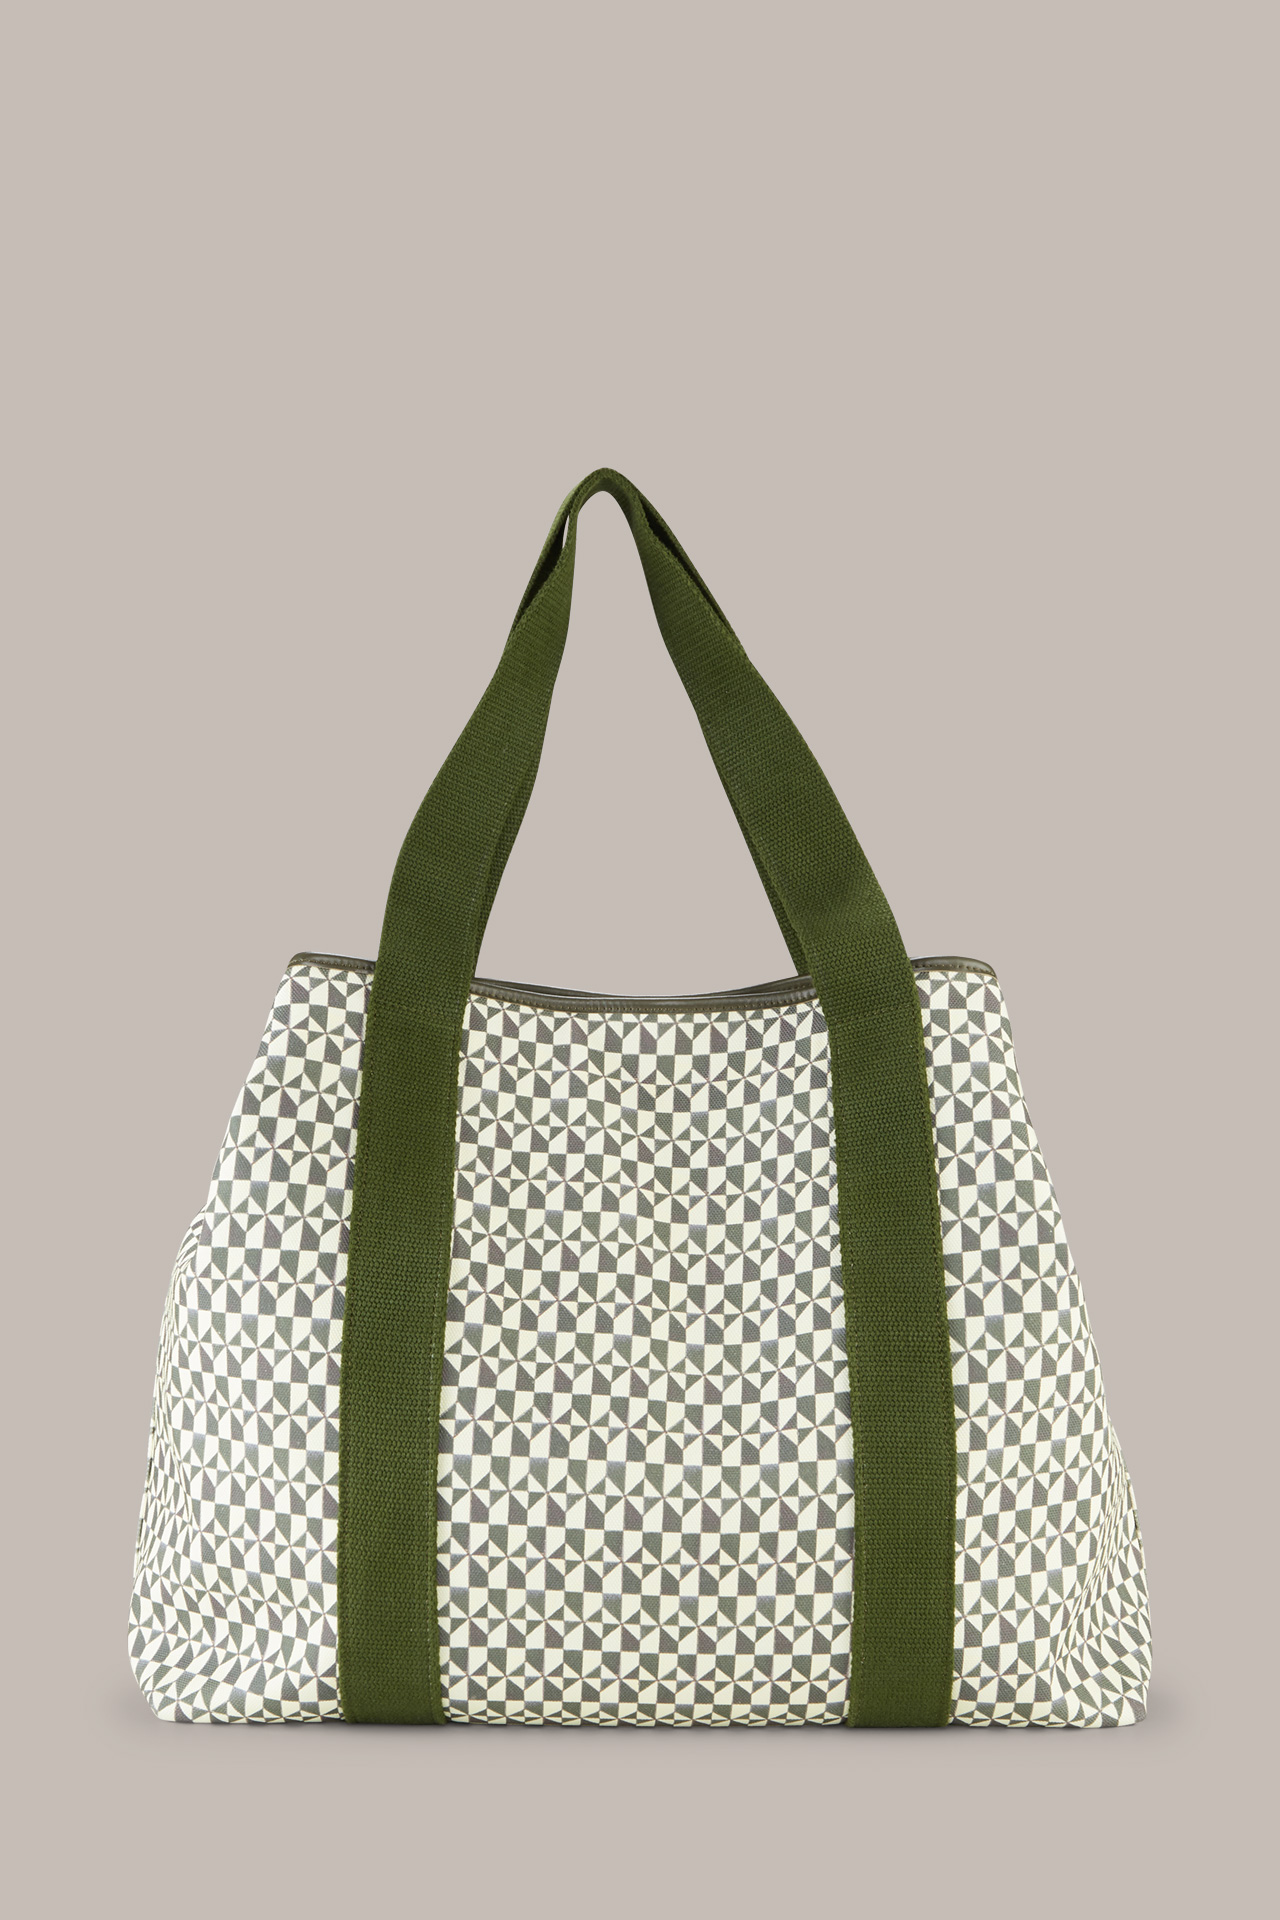 Canvas Shopper in Olive and Ecru Patterned